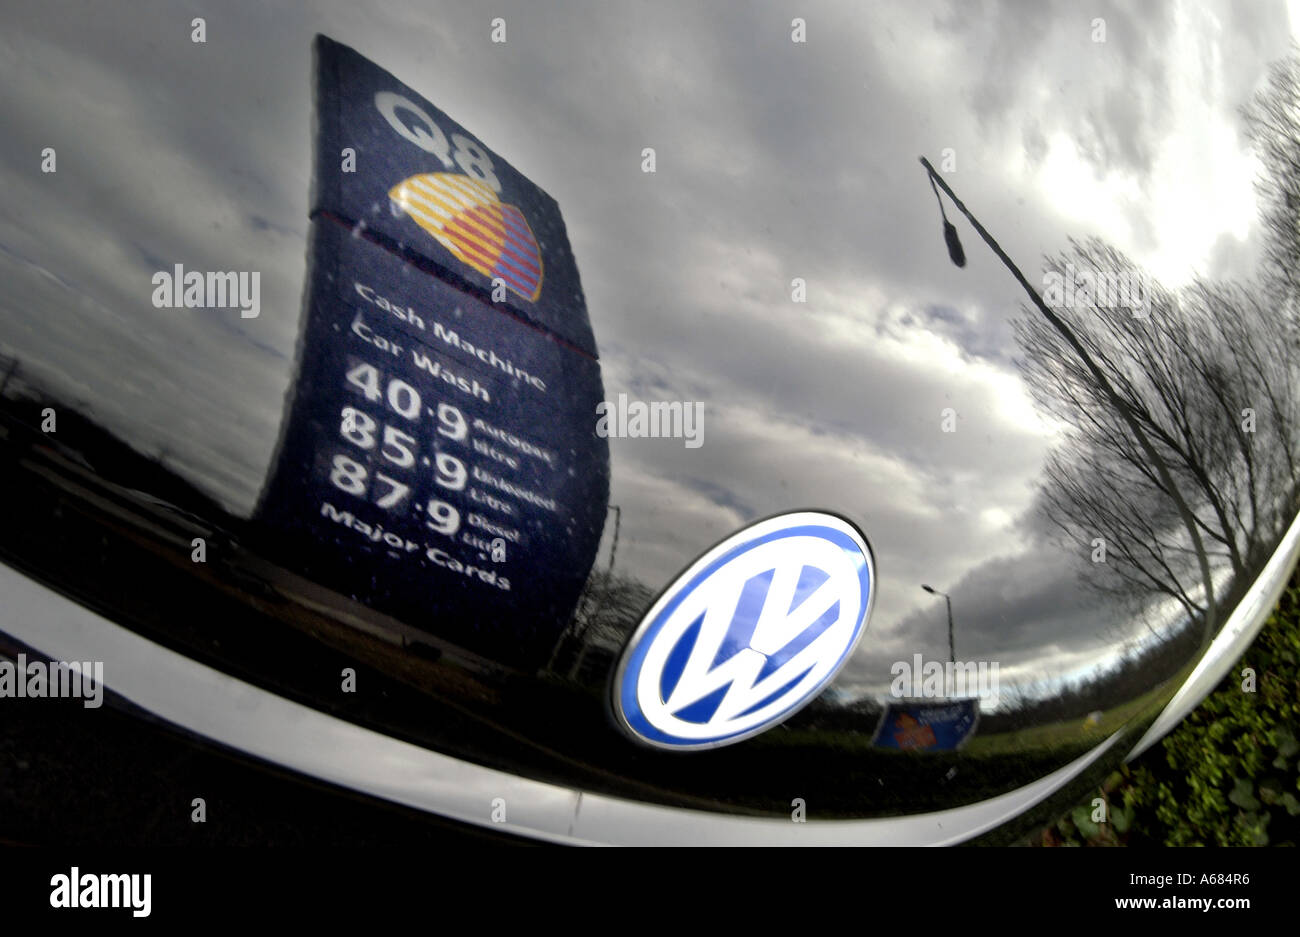 A Q8 gas station sign for petrol at 87.9p reflected in the bonnet of a VW Beetle Stock Photo